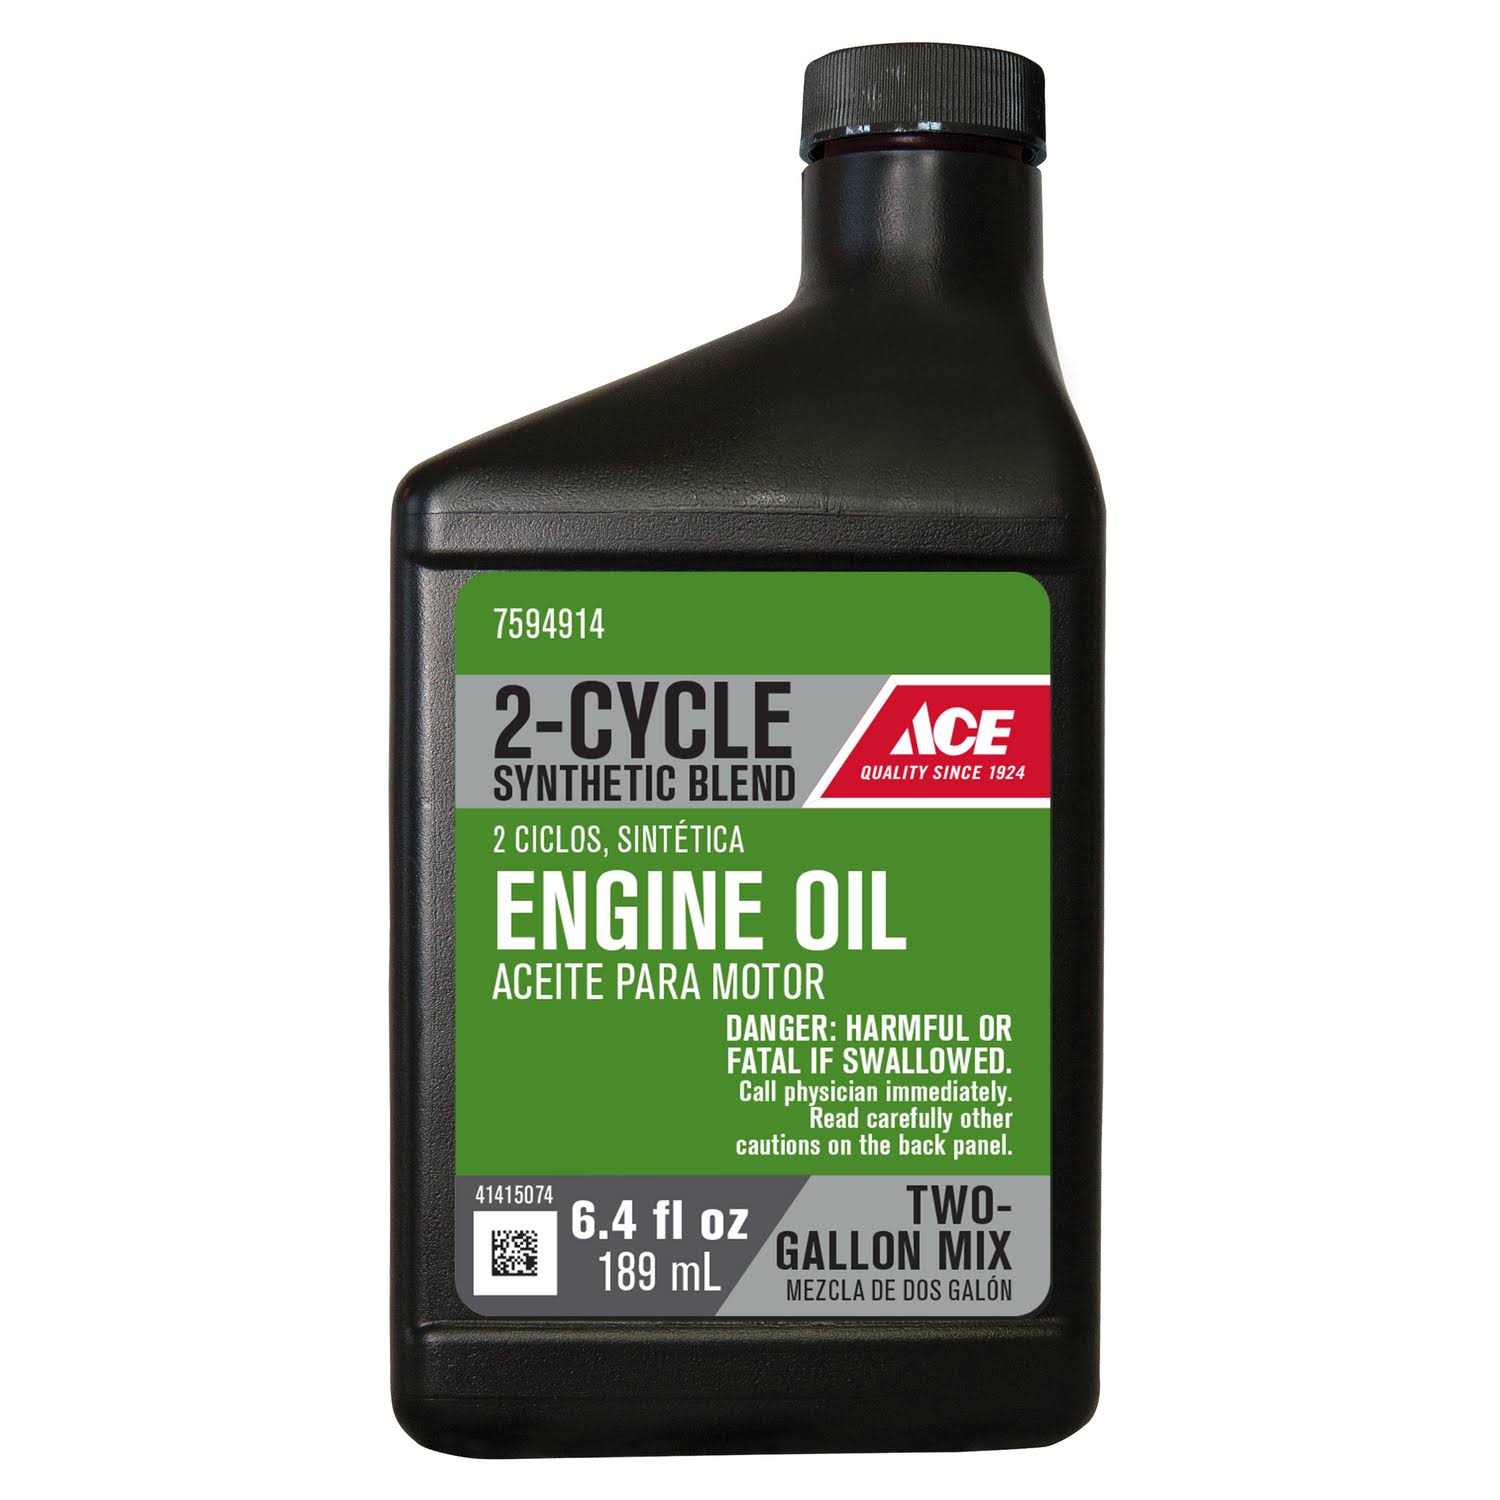 Ace Engine Oil, 2-Cycle, Synthetic Blend - 6.4 fl oz